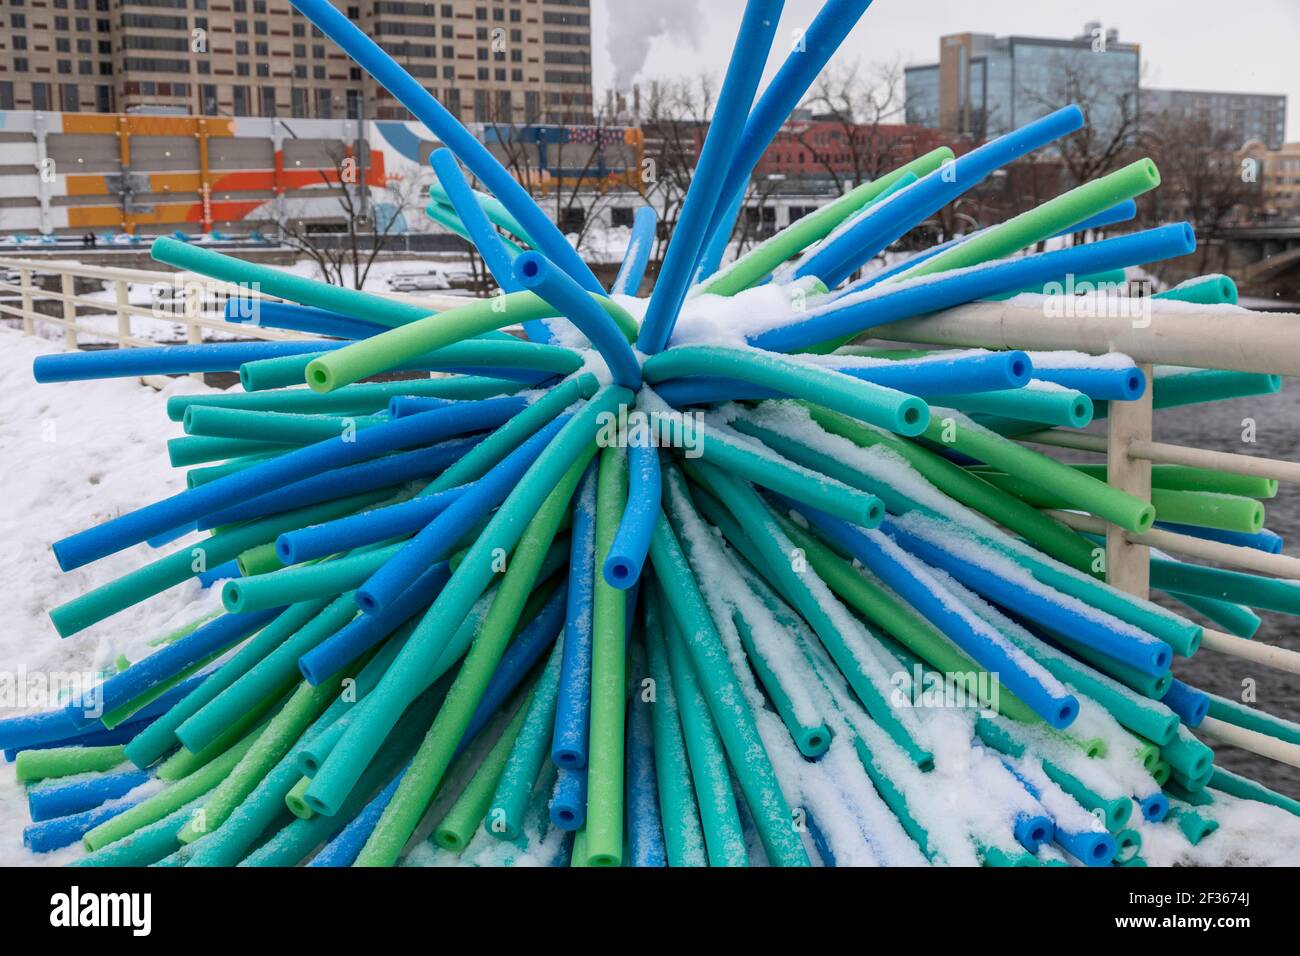 Grand Rapids, Michigan - Art made from pool noodles on the Blue Bridge, a pedestrian bridge over the Grand River. It was part of the World of Winter F Stock Photo